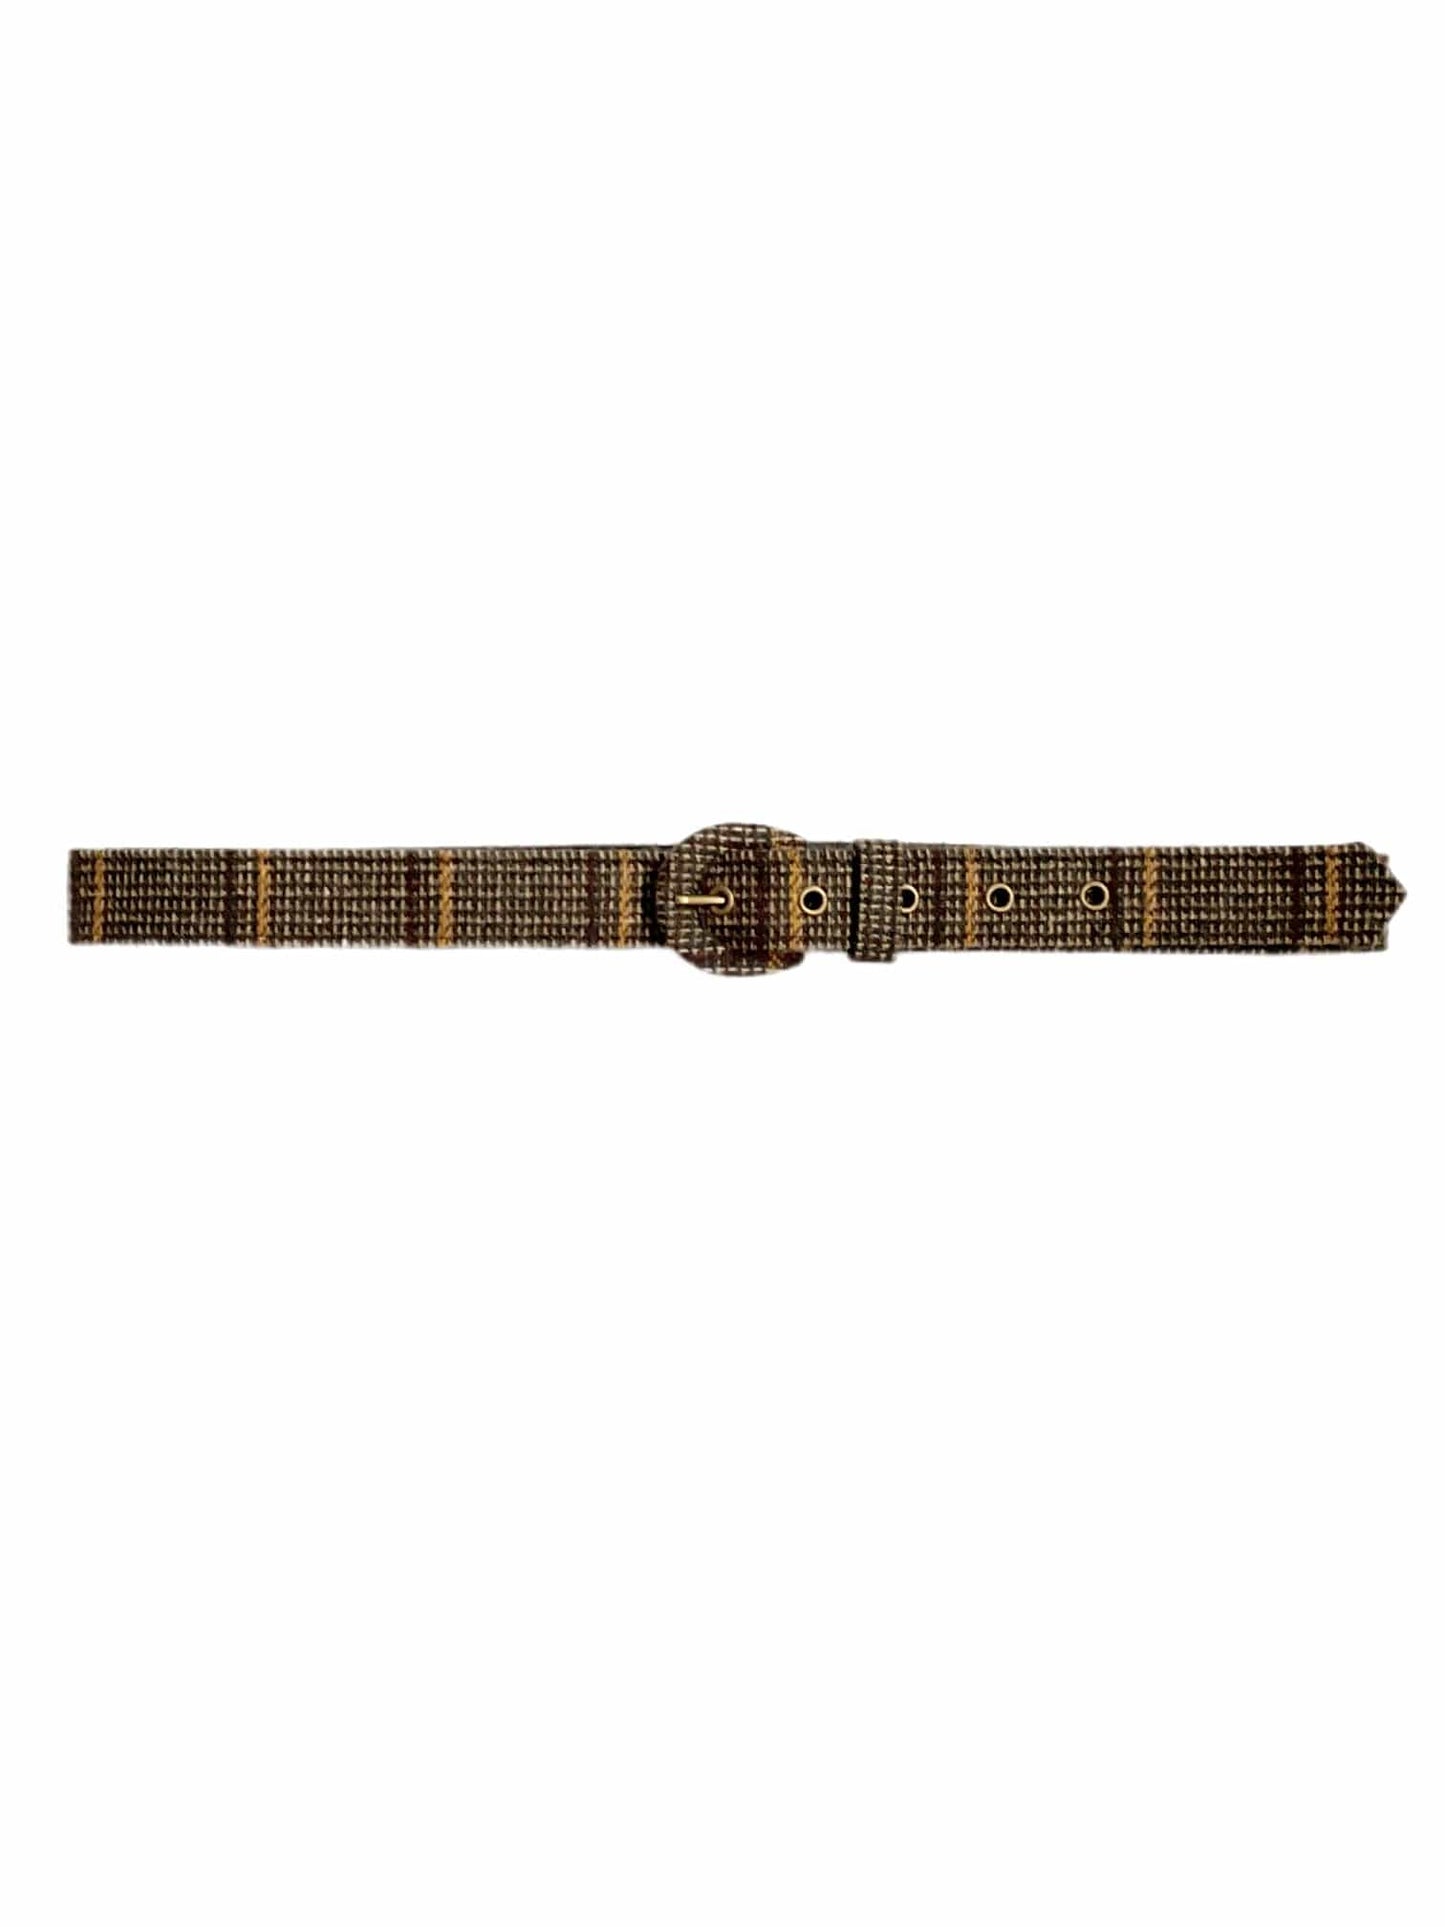 Narrow Belt for Nature vs Nurture Collection Belts CHRISTINE ALCALAY Toffee Plaid (Wool) Extra Small 